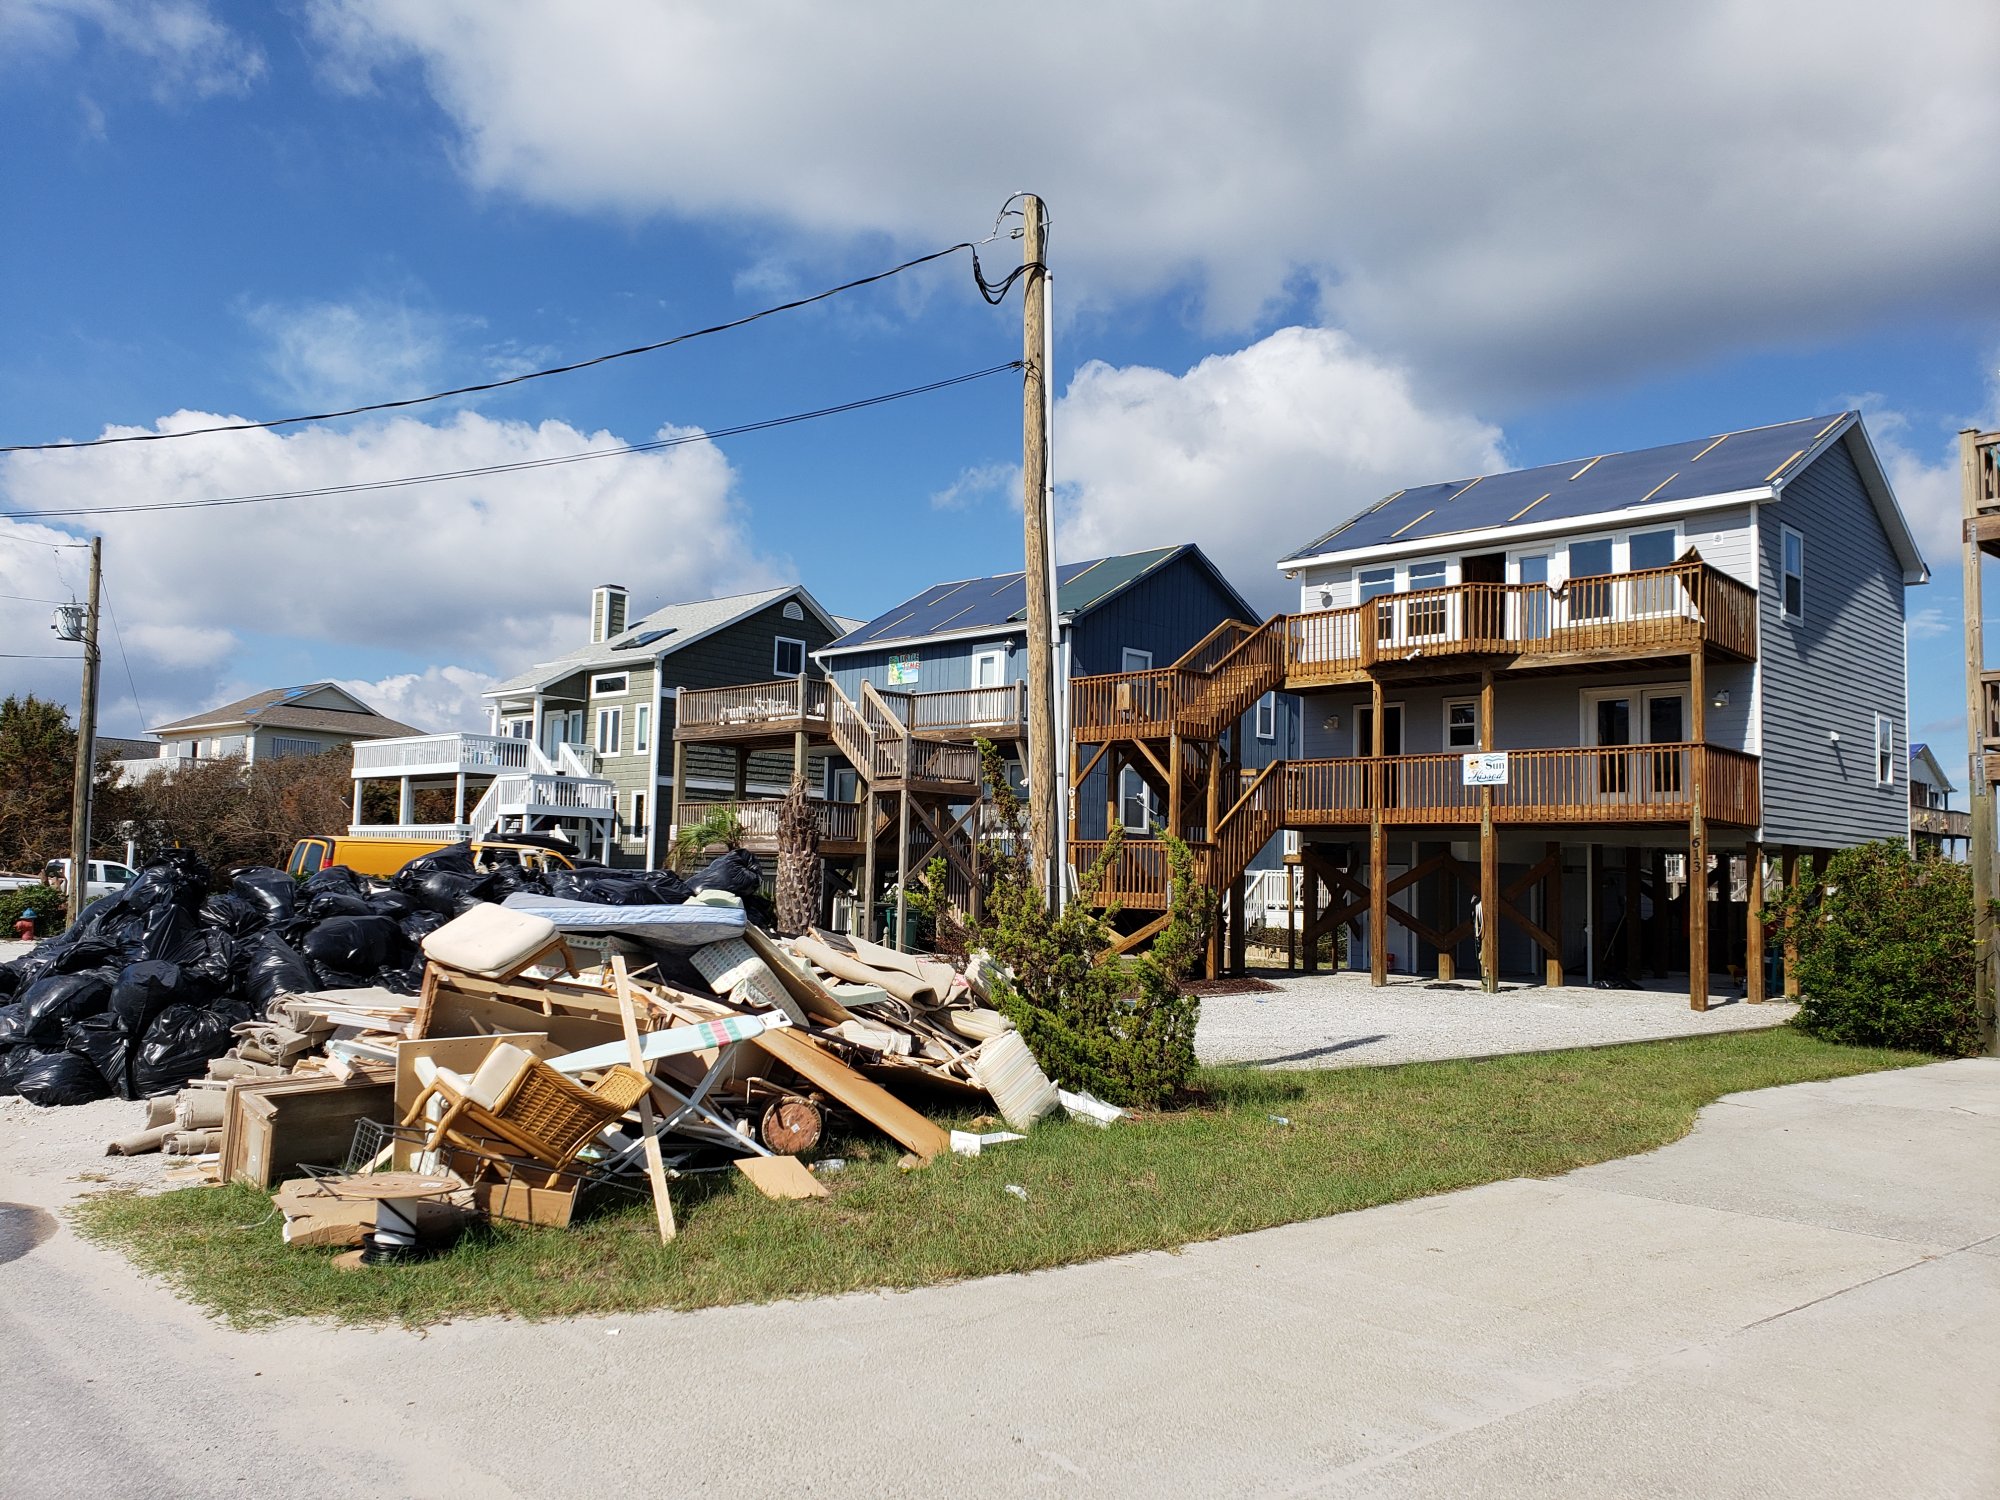 Many homes suffered roof damage, allowing the 15 to 25 inches of rain that fell to destroy the homes' interiors.  Piles of molded and water damaged items were a common sight for weeks after the storm. (Photo credit: Carl Morgan/NWS)